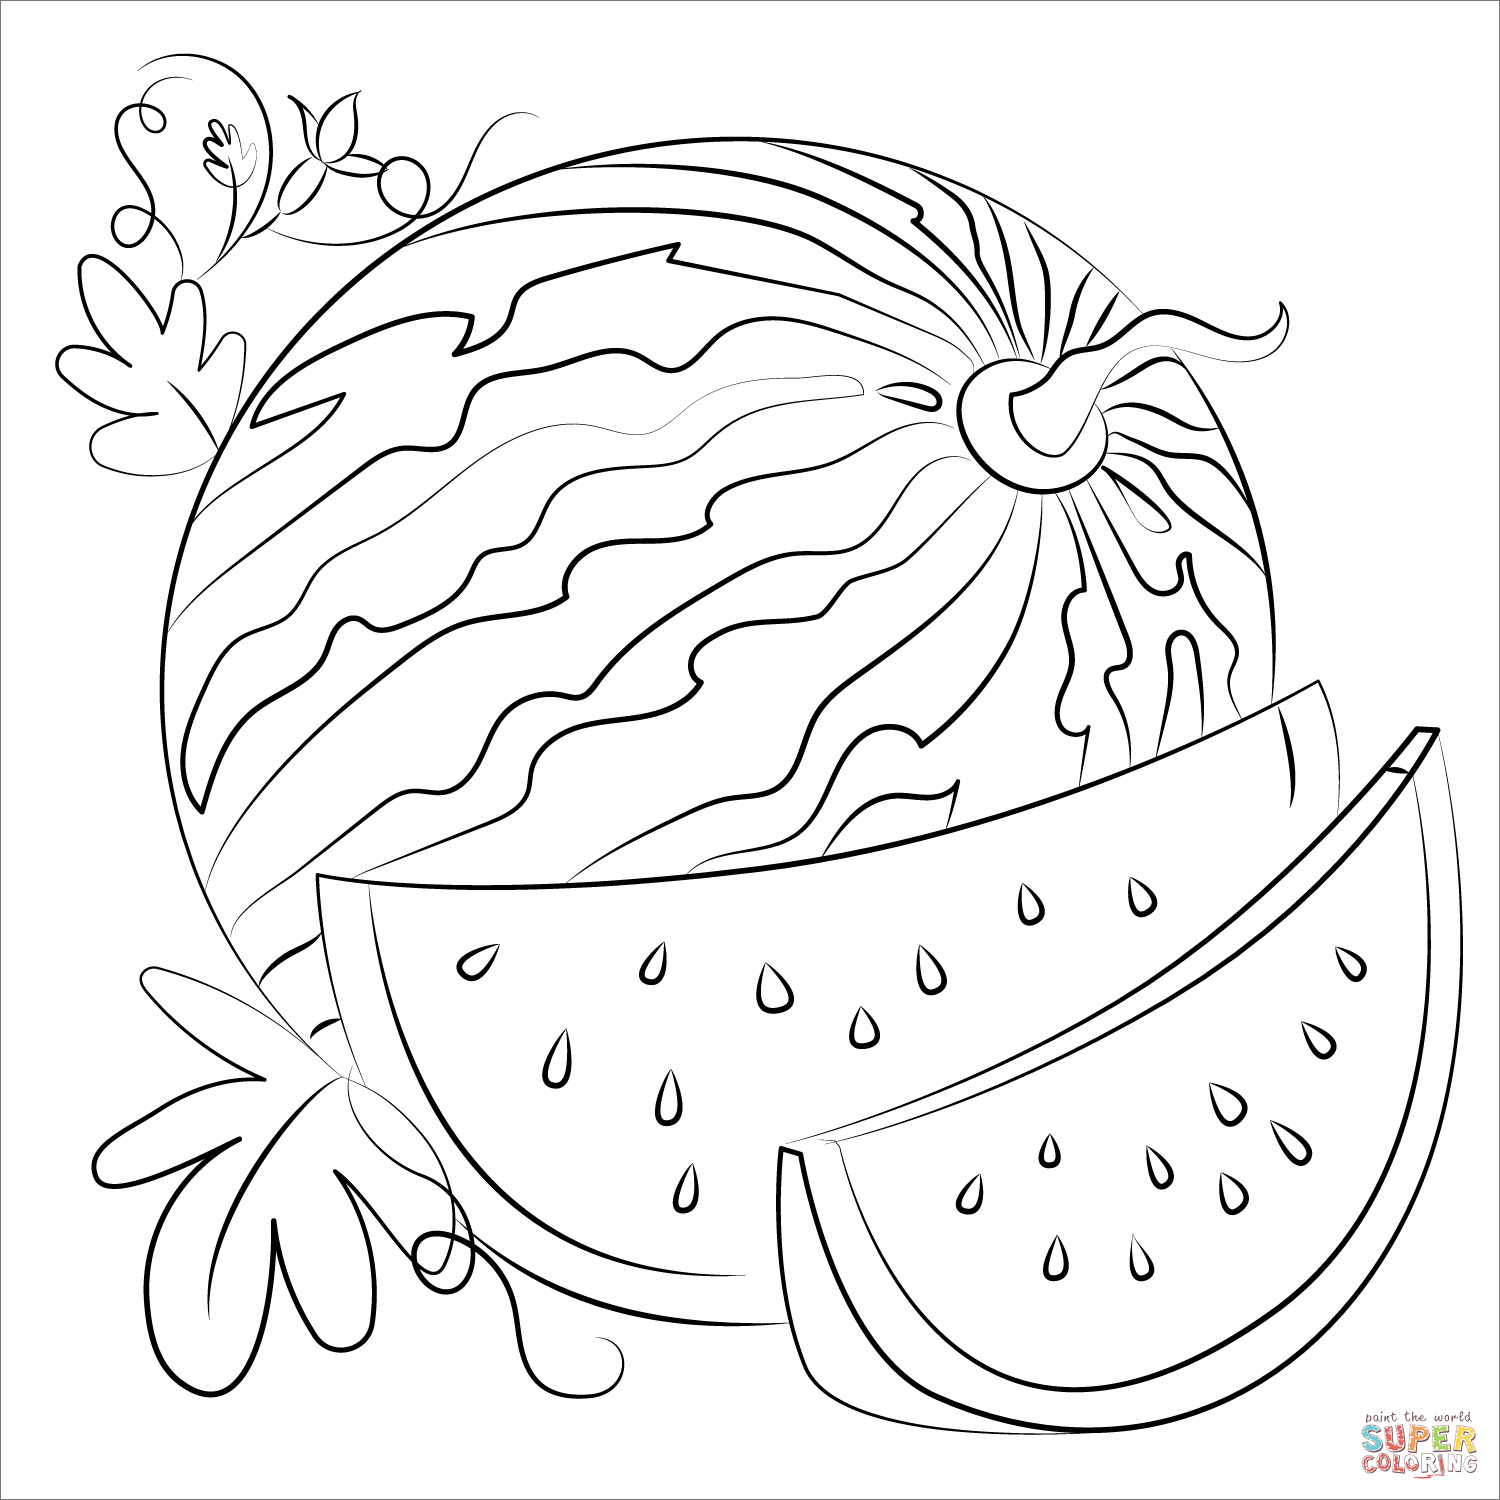 Watermelon coloring page | Free Printable Coloring Pages